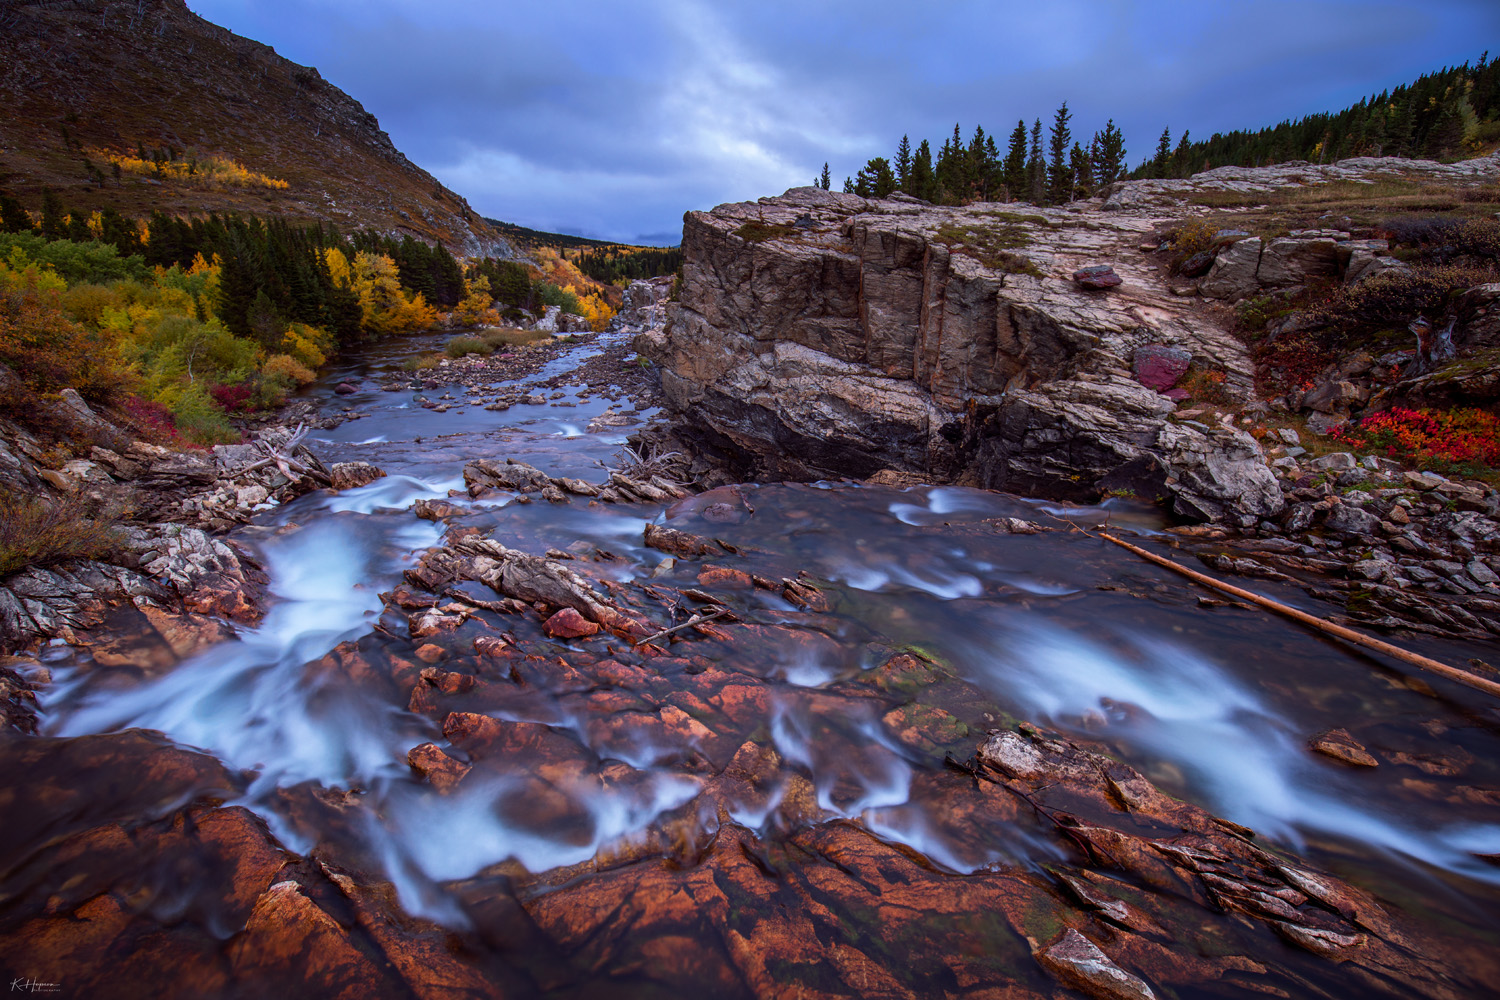 small rapids on a river in Glacier National Park with warm fall colored vegetation on the shoreline with stormy clouds above